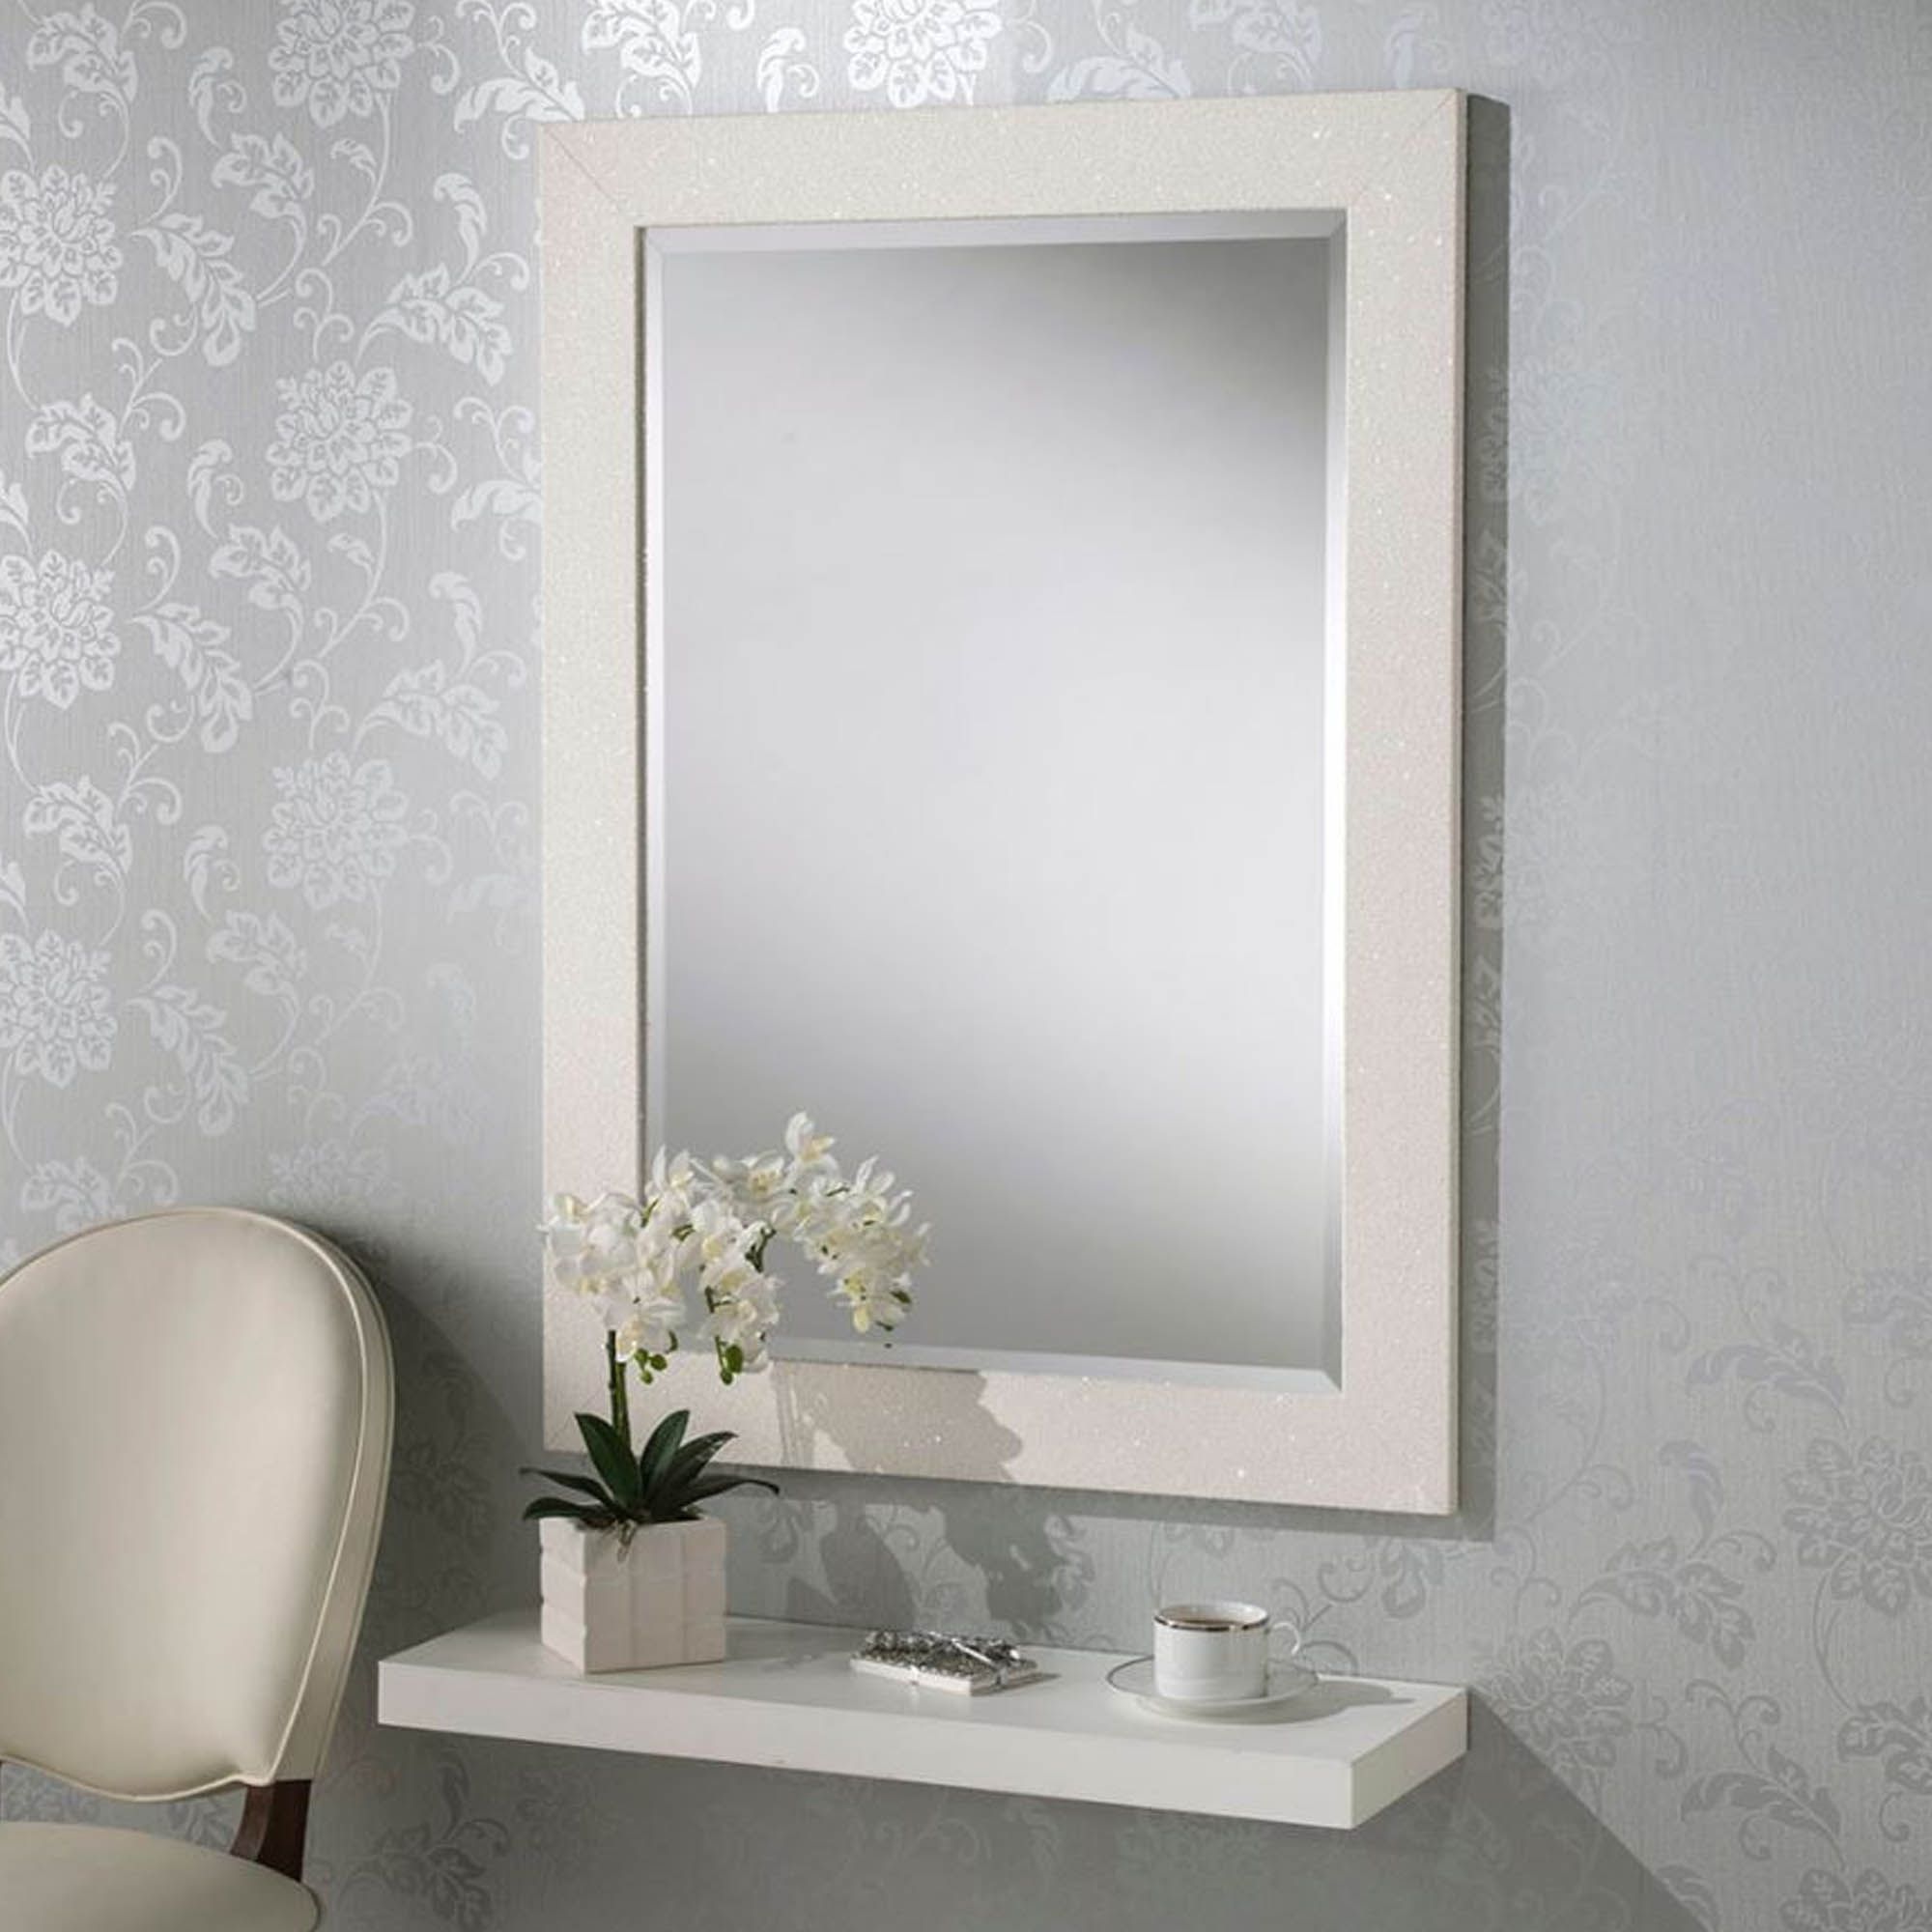 Glitter Wall Mirrors Pertaining To Widely Used White Glitter Rectangular Wall Mirror (View 6 of 20)